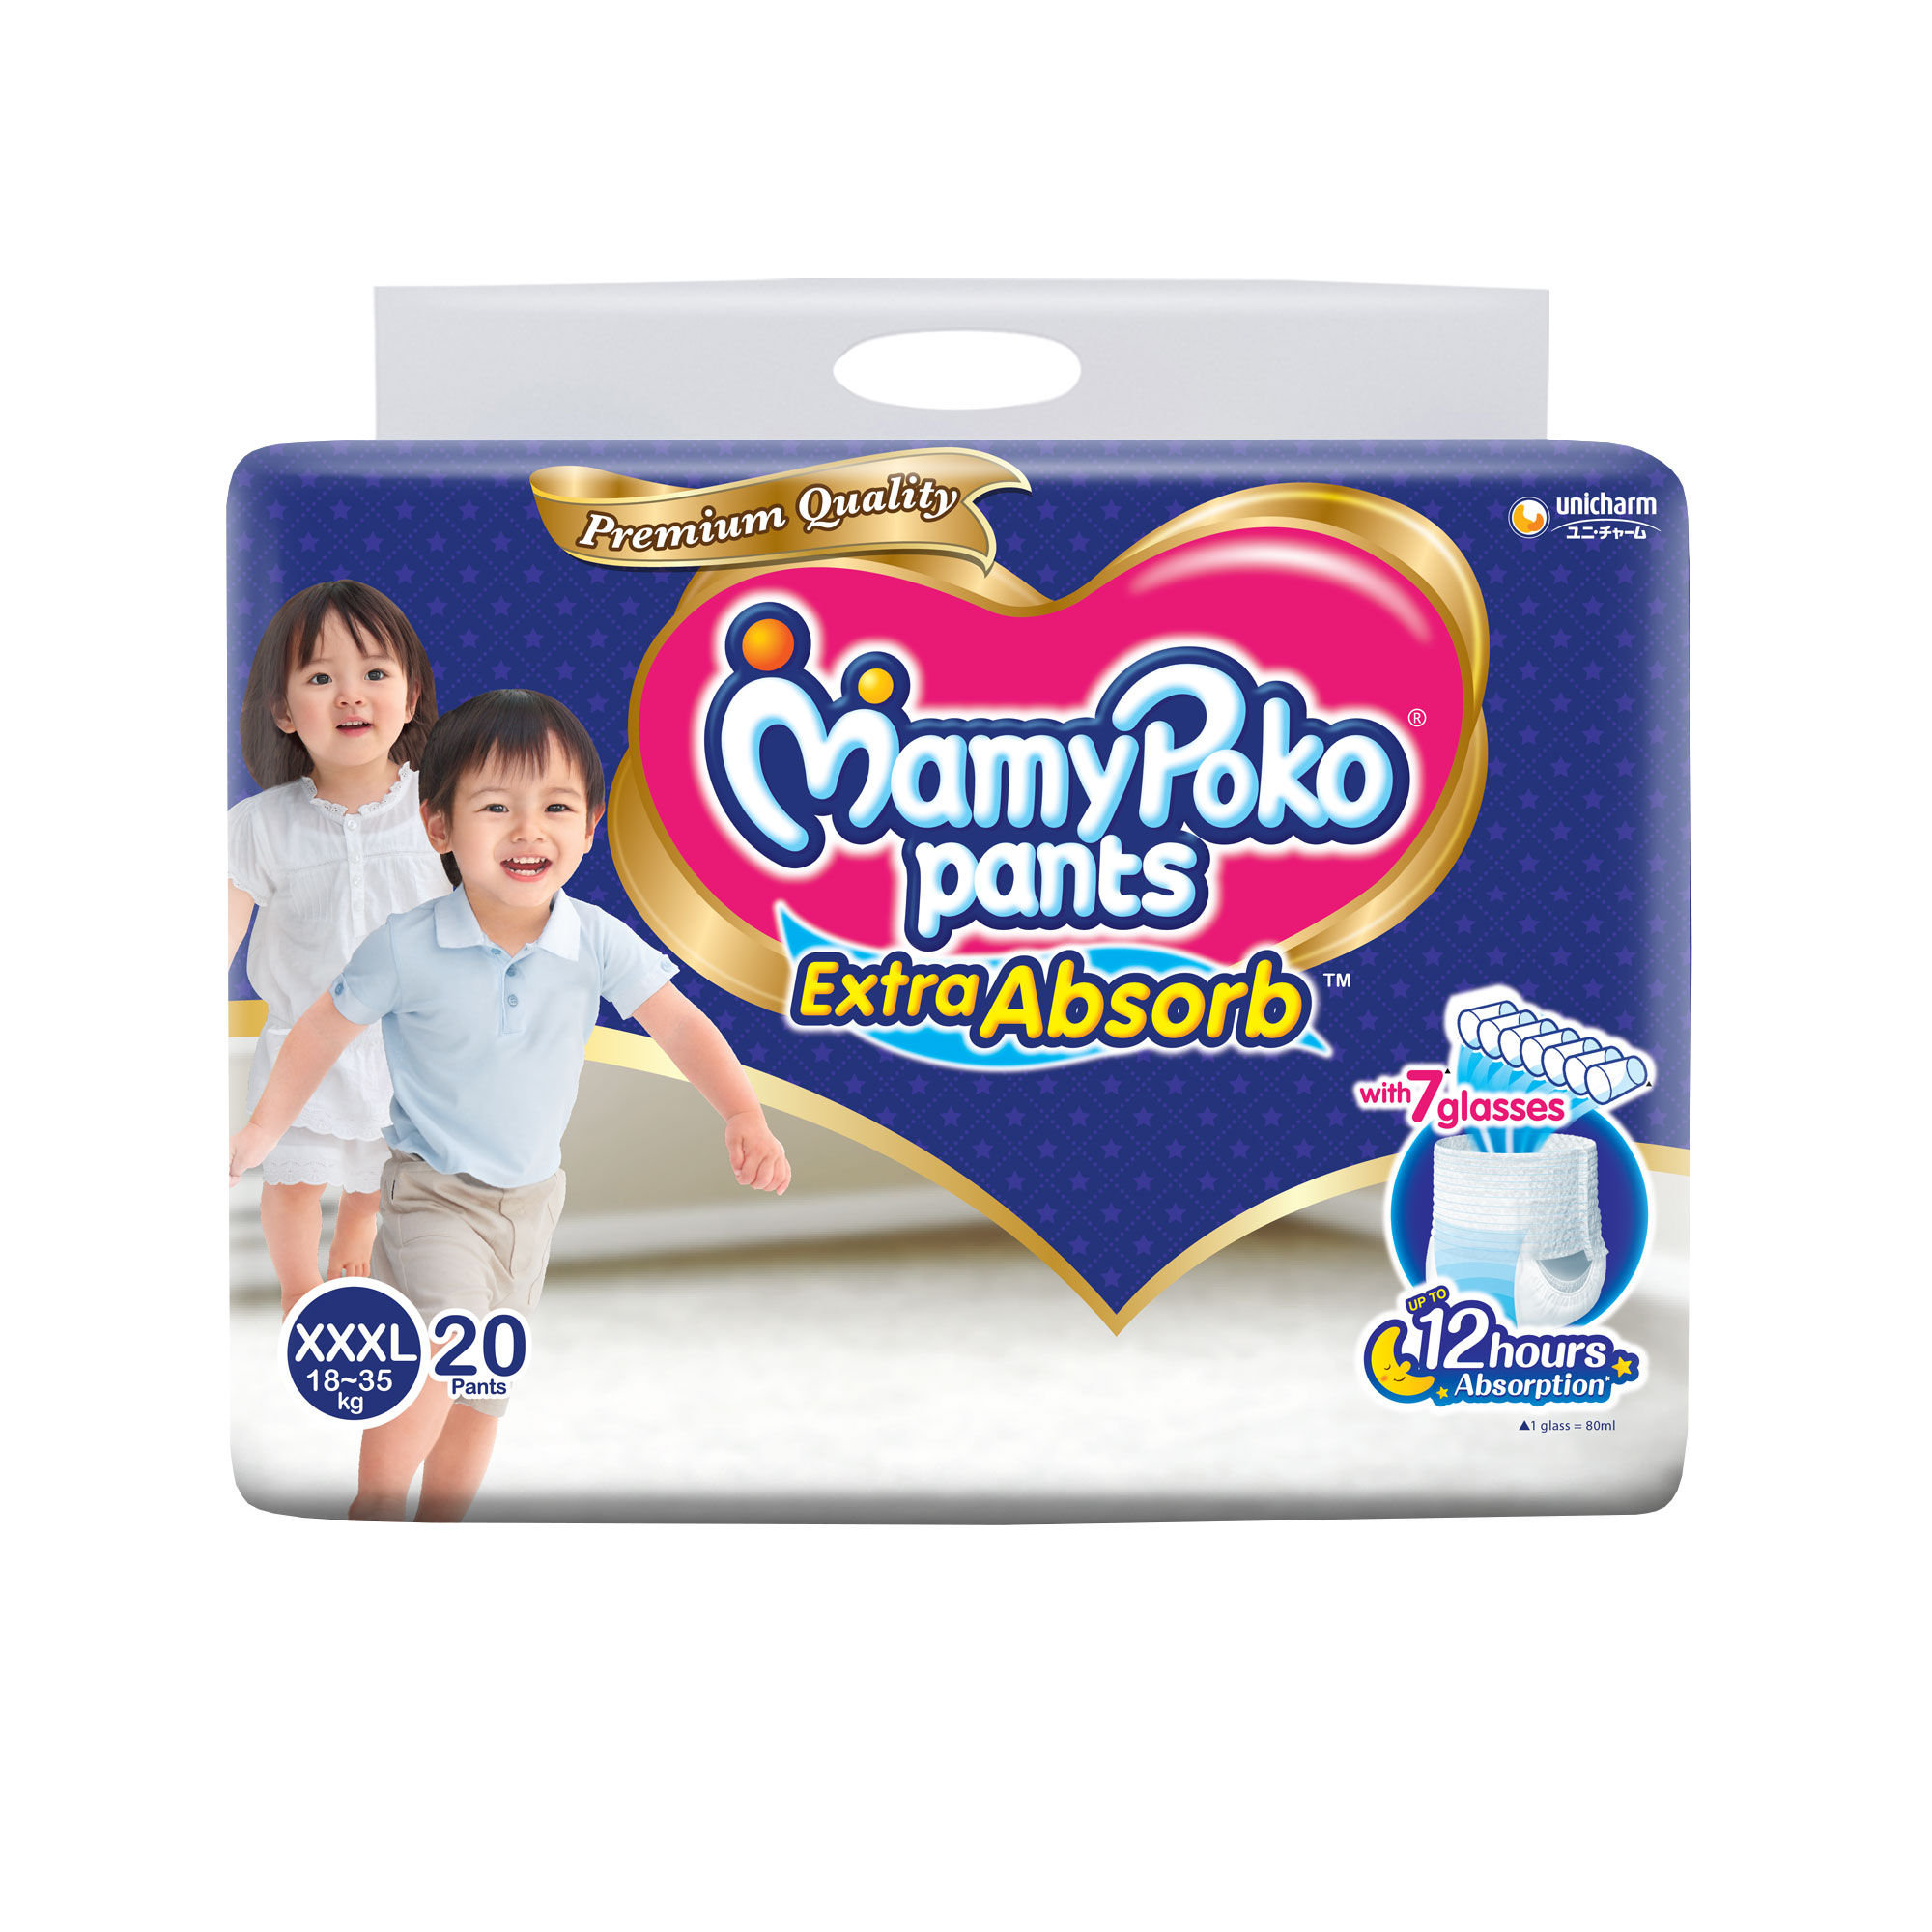 MamyPoko Pants Standard Pant Style Diapers Small 40 Pieces Online in India  Buy at Best Price from Firstcrycom  12022312